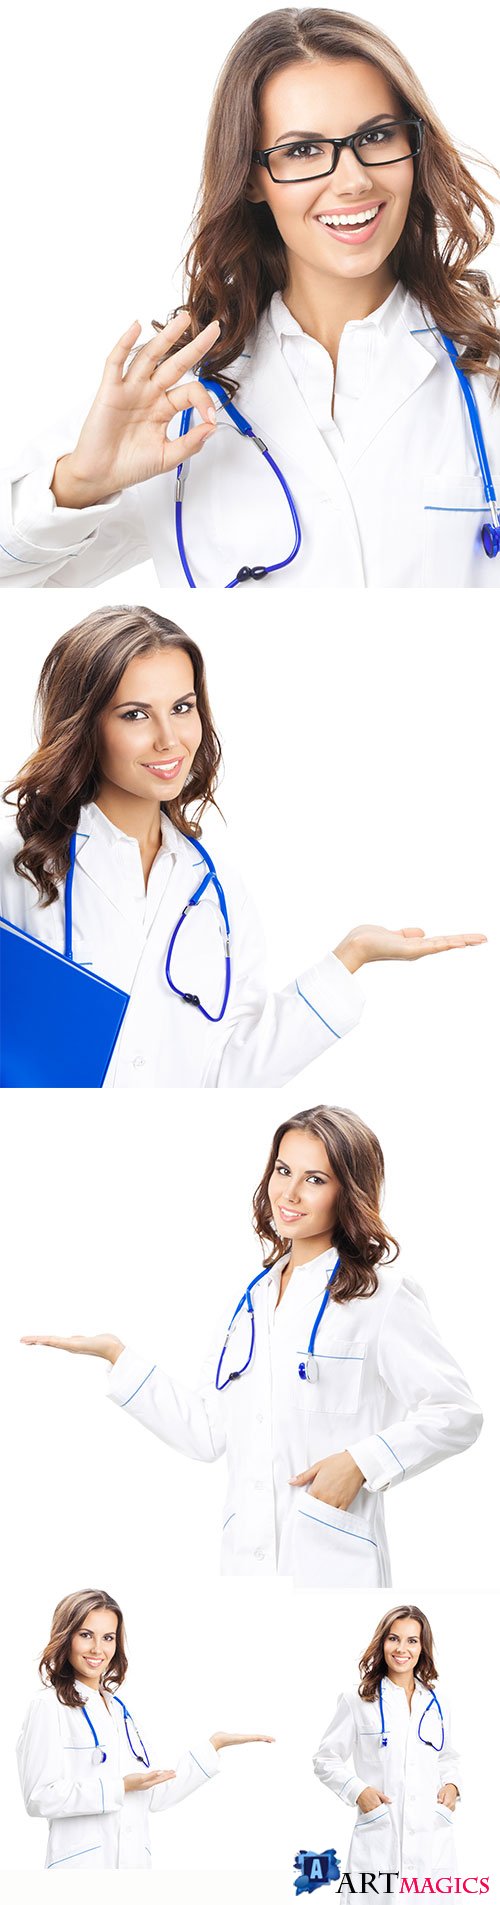 Woman doctor in different poses